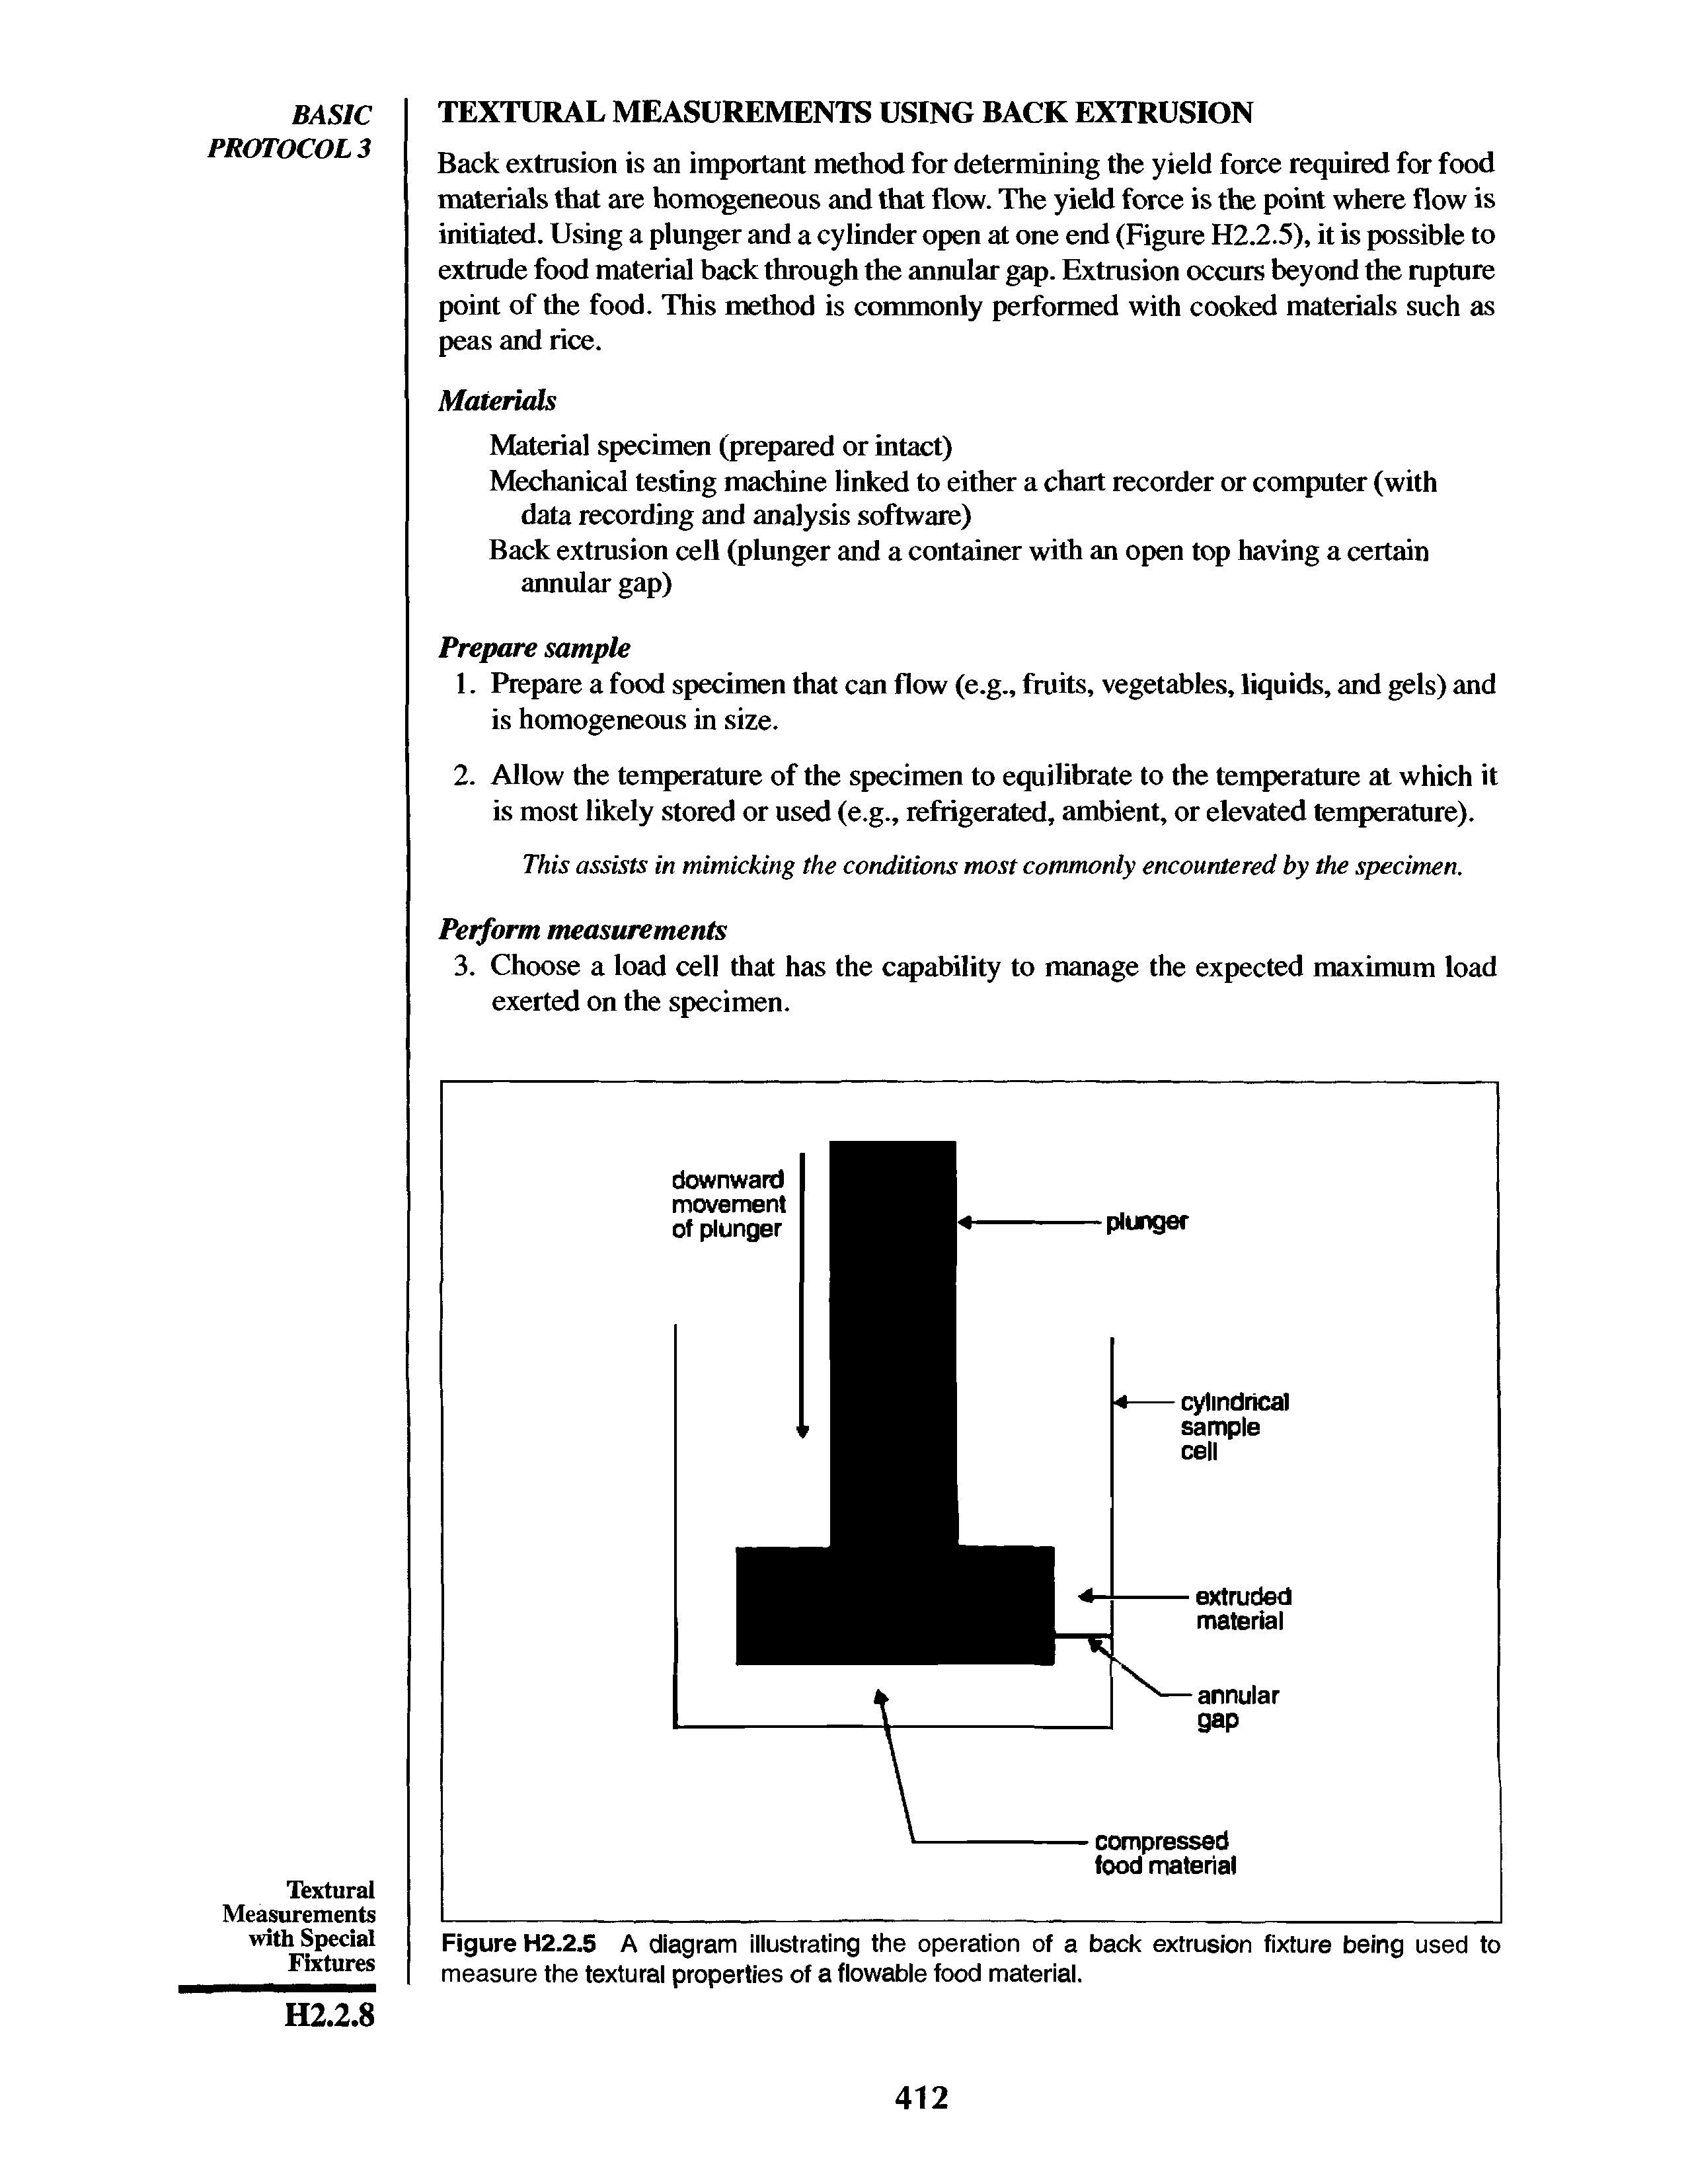 Figure H2.2.5 A diagram illustrating the operation of a back extrusion fixture being used to measure the textural properties of a flowable food material.